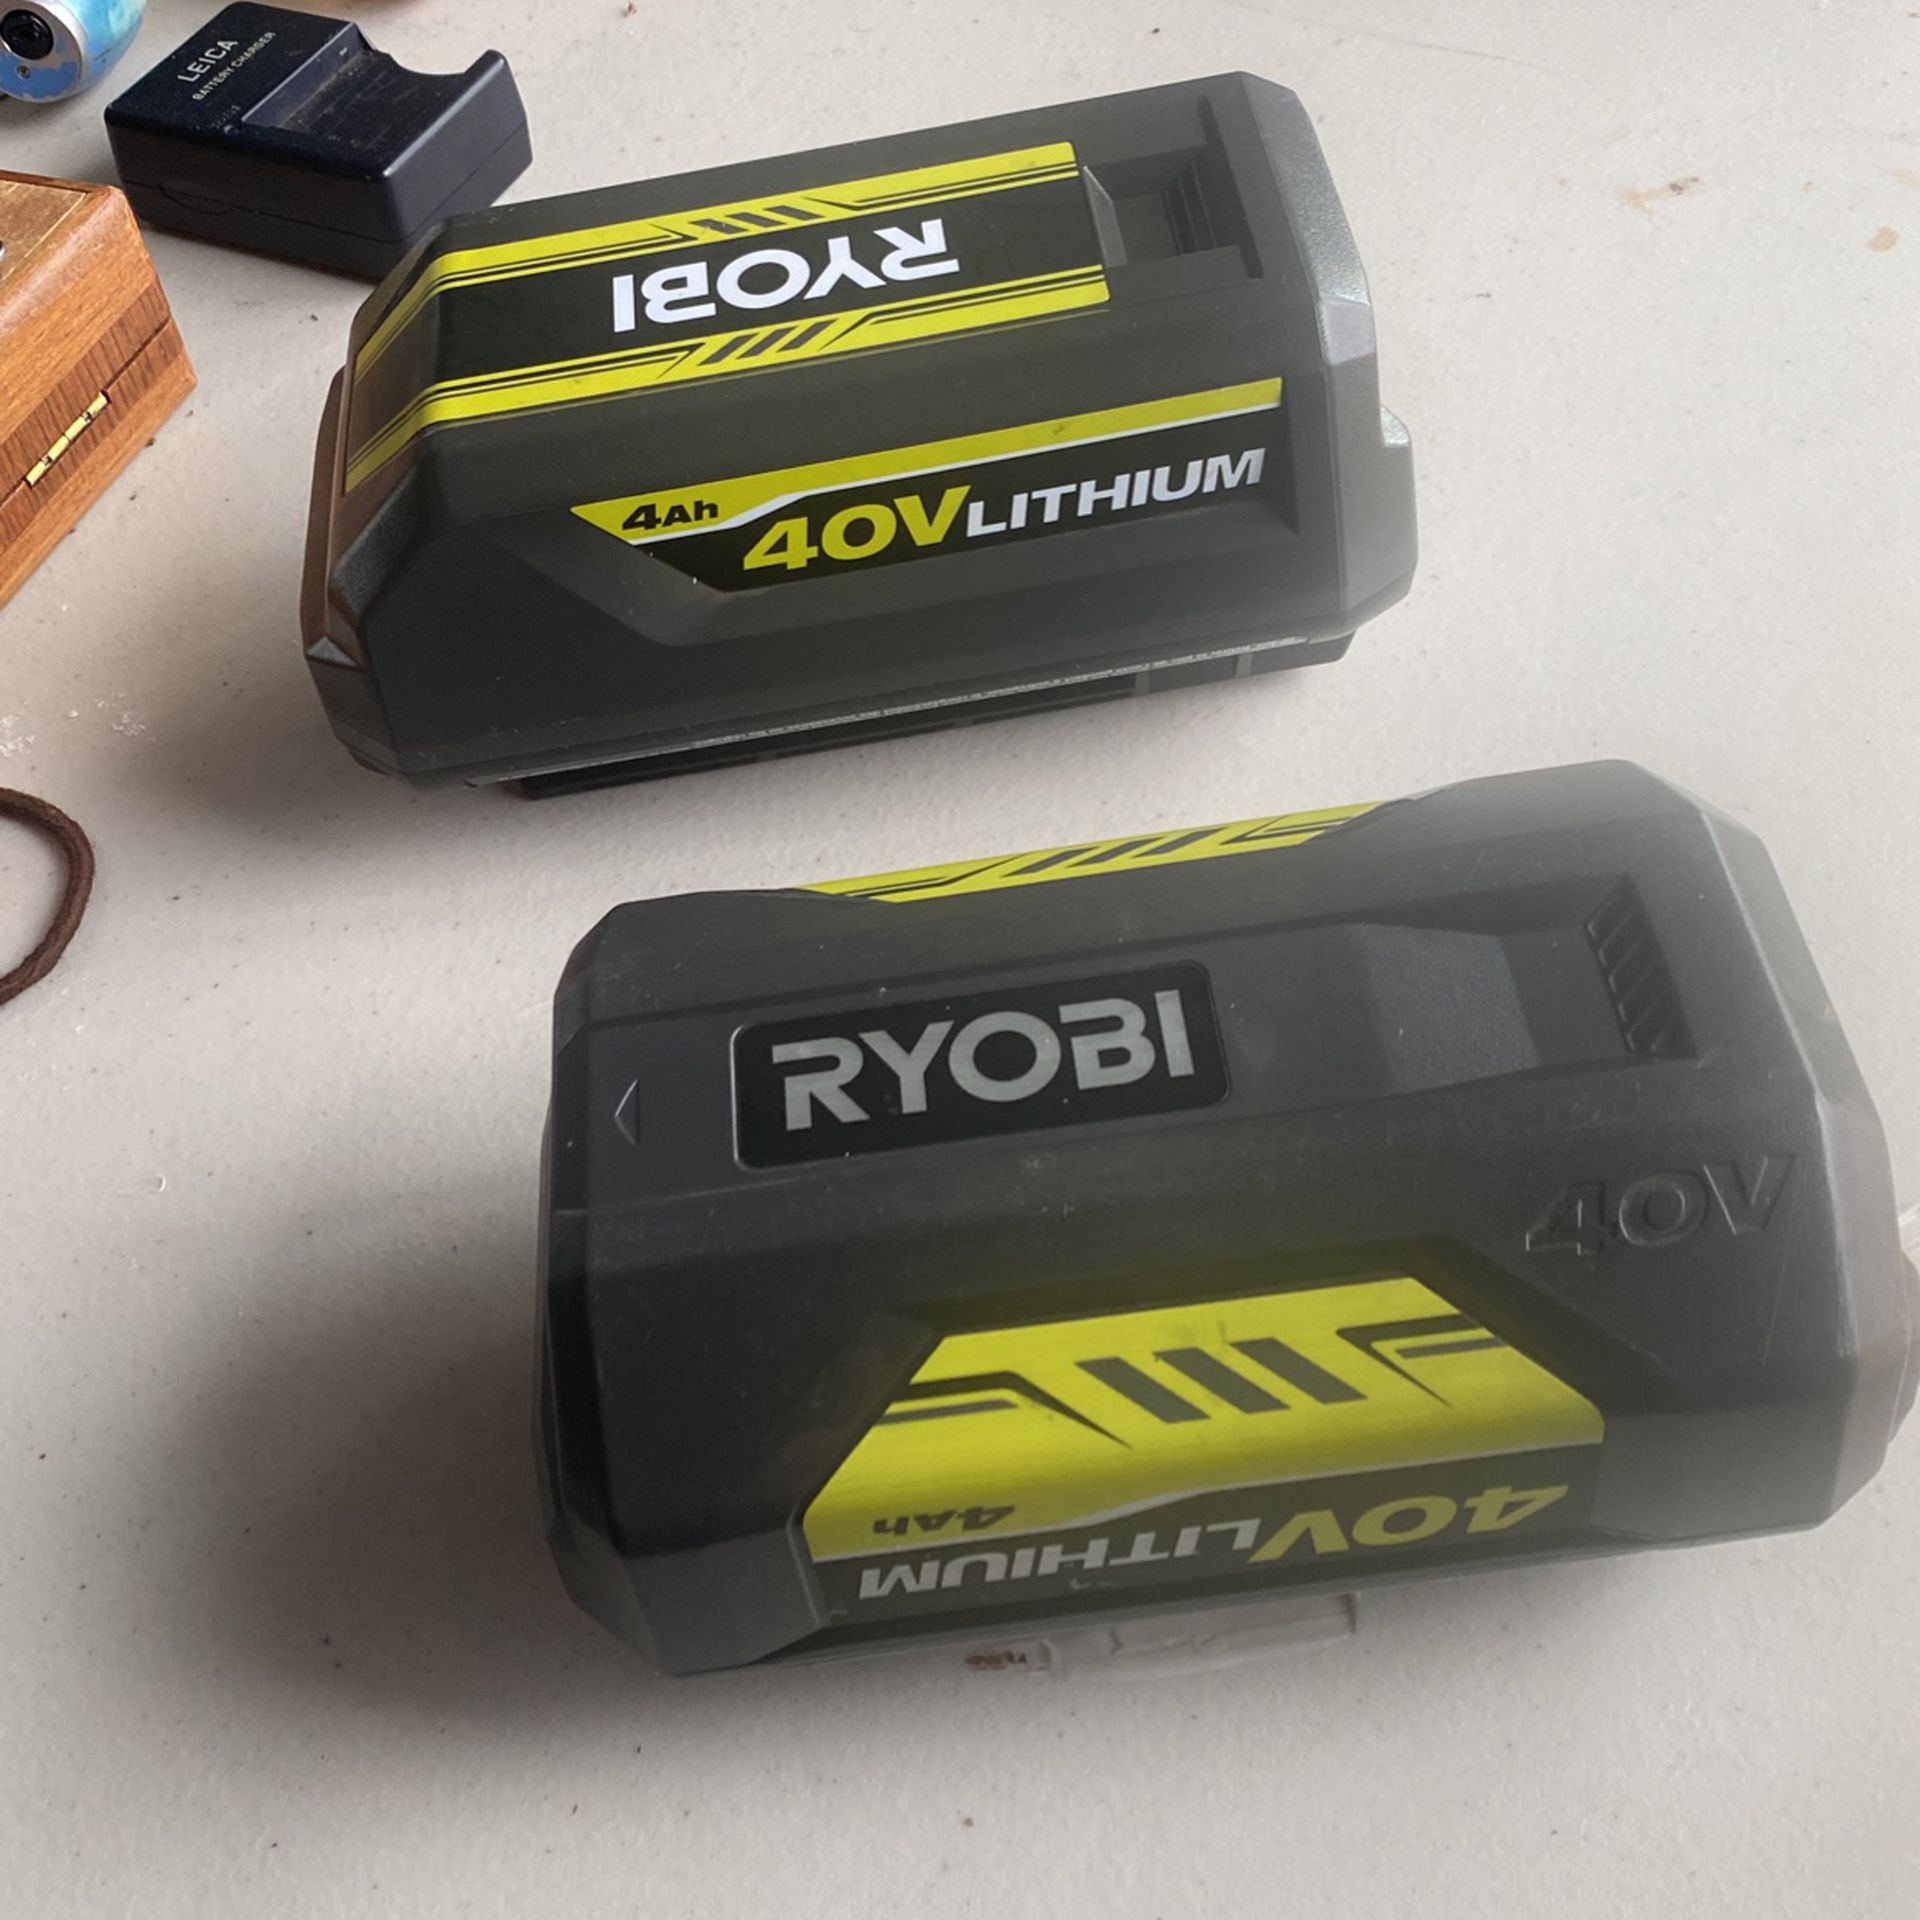 Ryobi  40v Lithium 4ah Batteries For Leaf Blower And Lawn mower